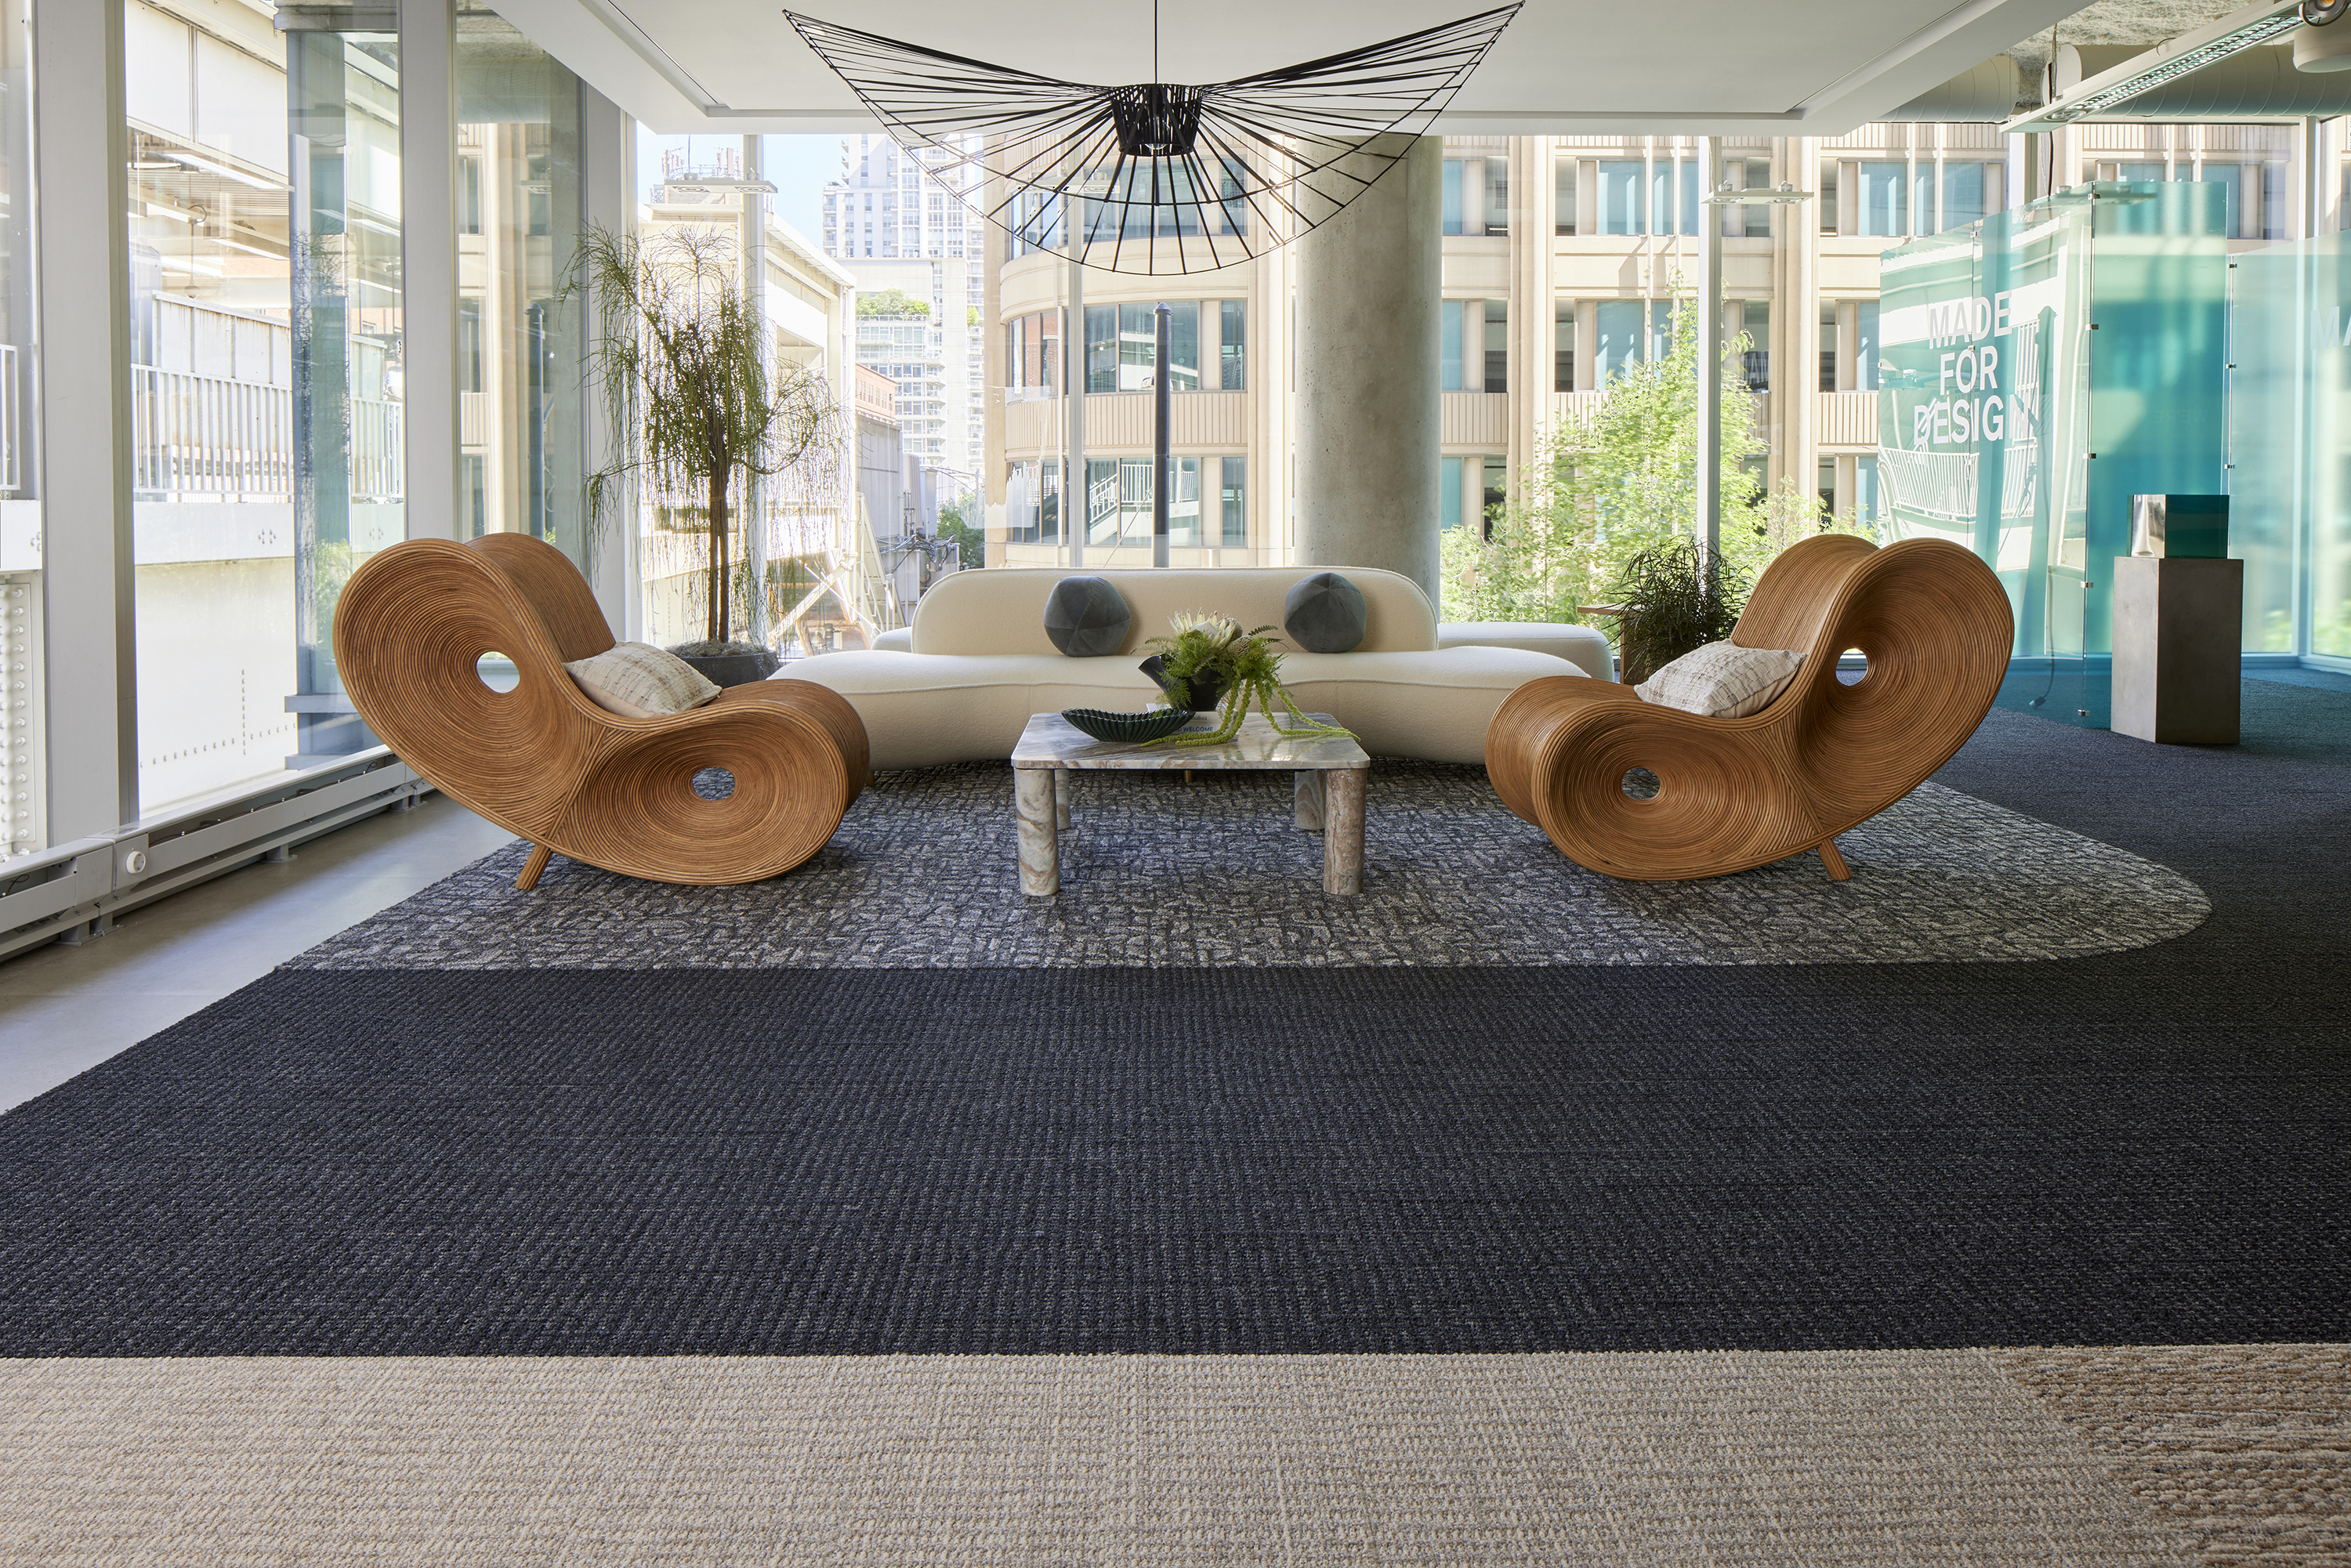 Interface E610 carpet tile with E613, E614 and E615 plank carpet tile and Hearth plank LVT in workplace seating area